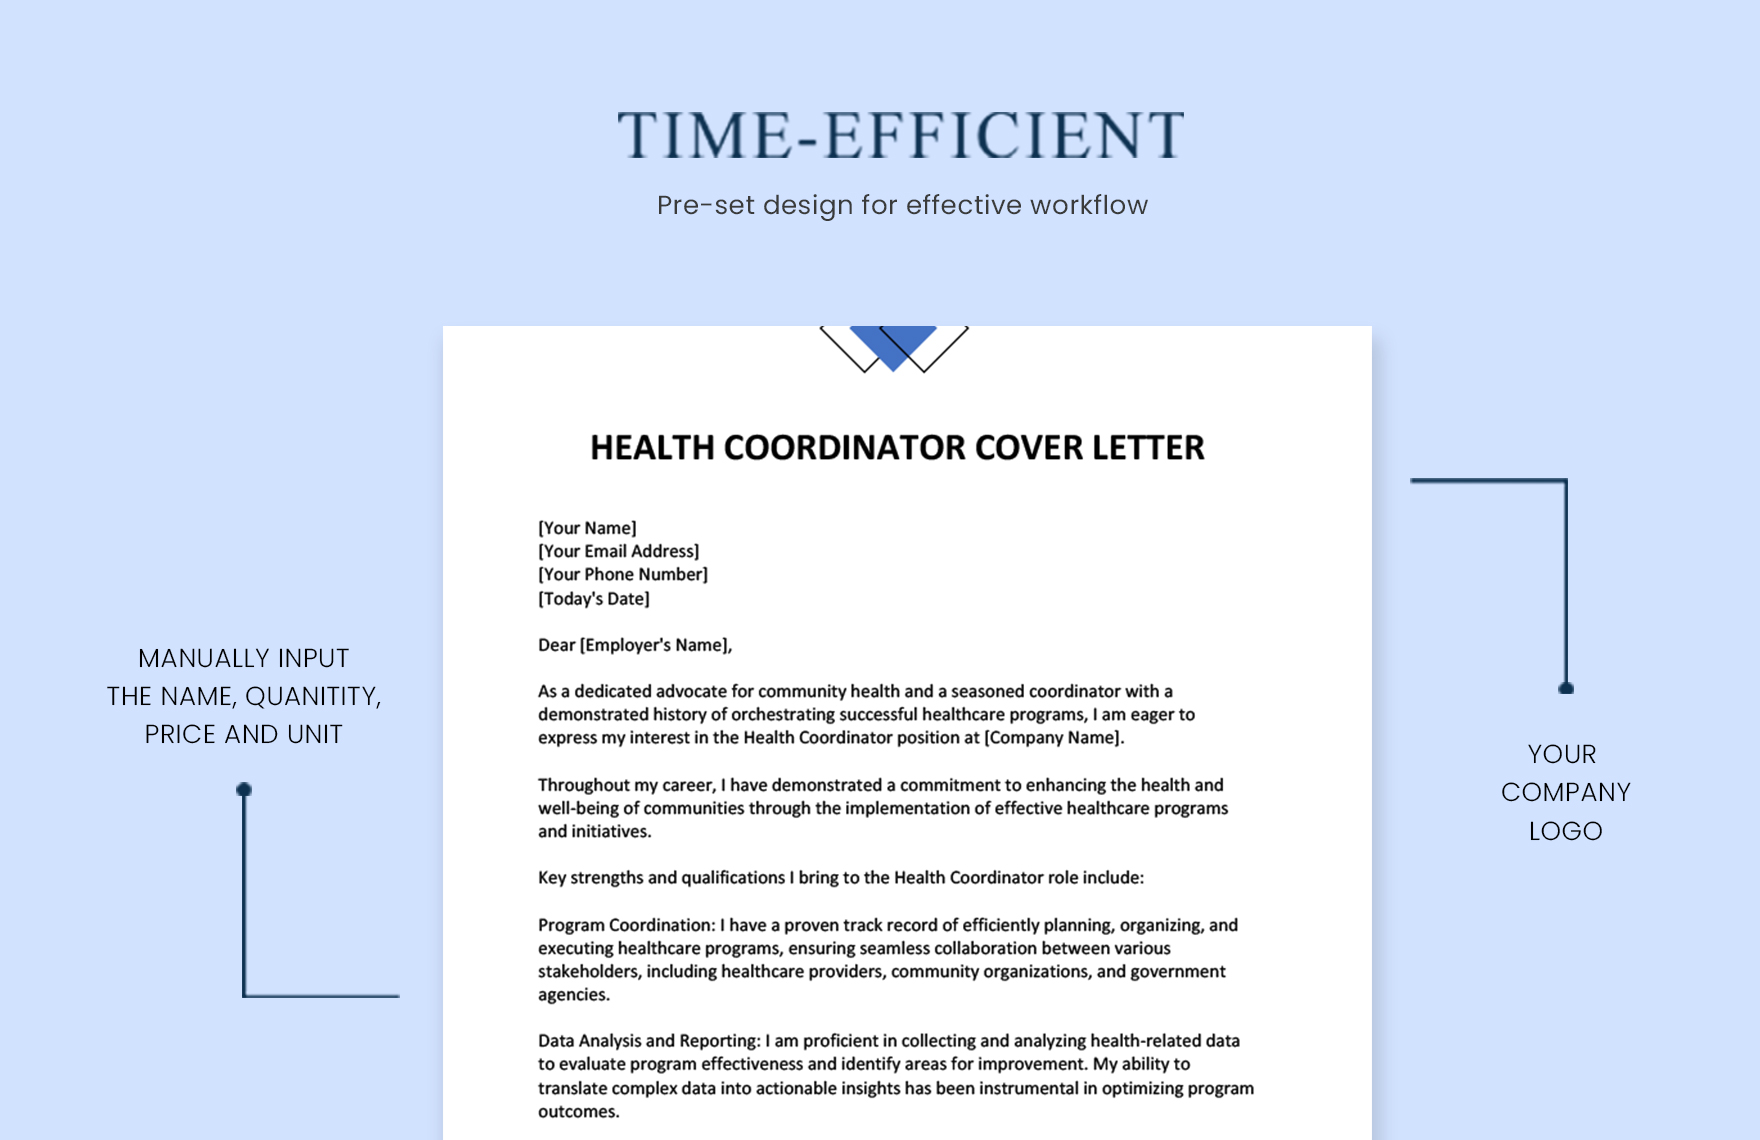 Health Coordinator Cover Letter